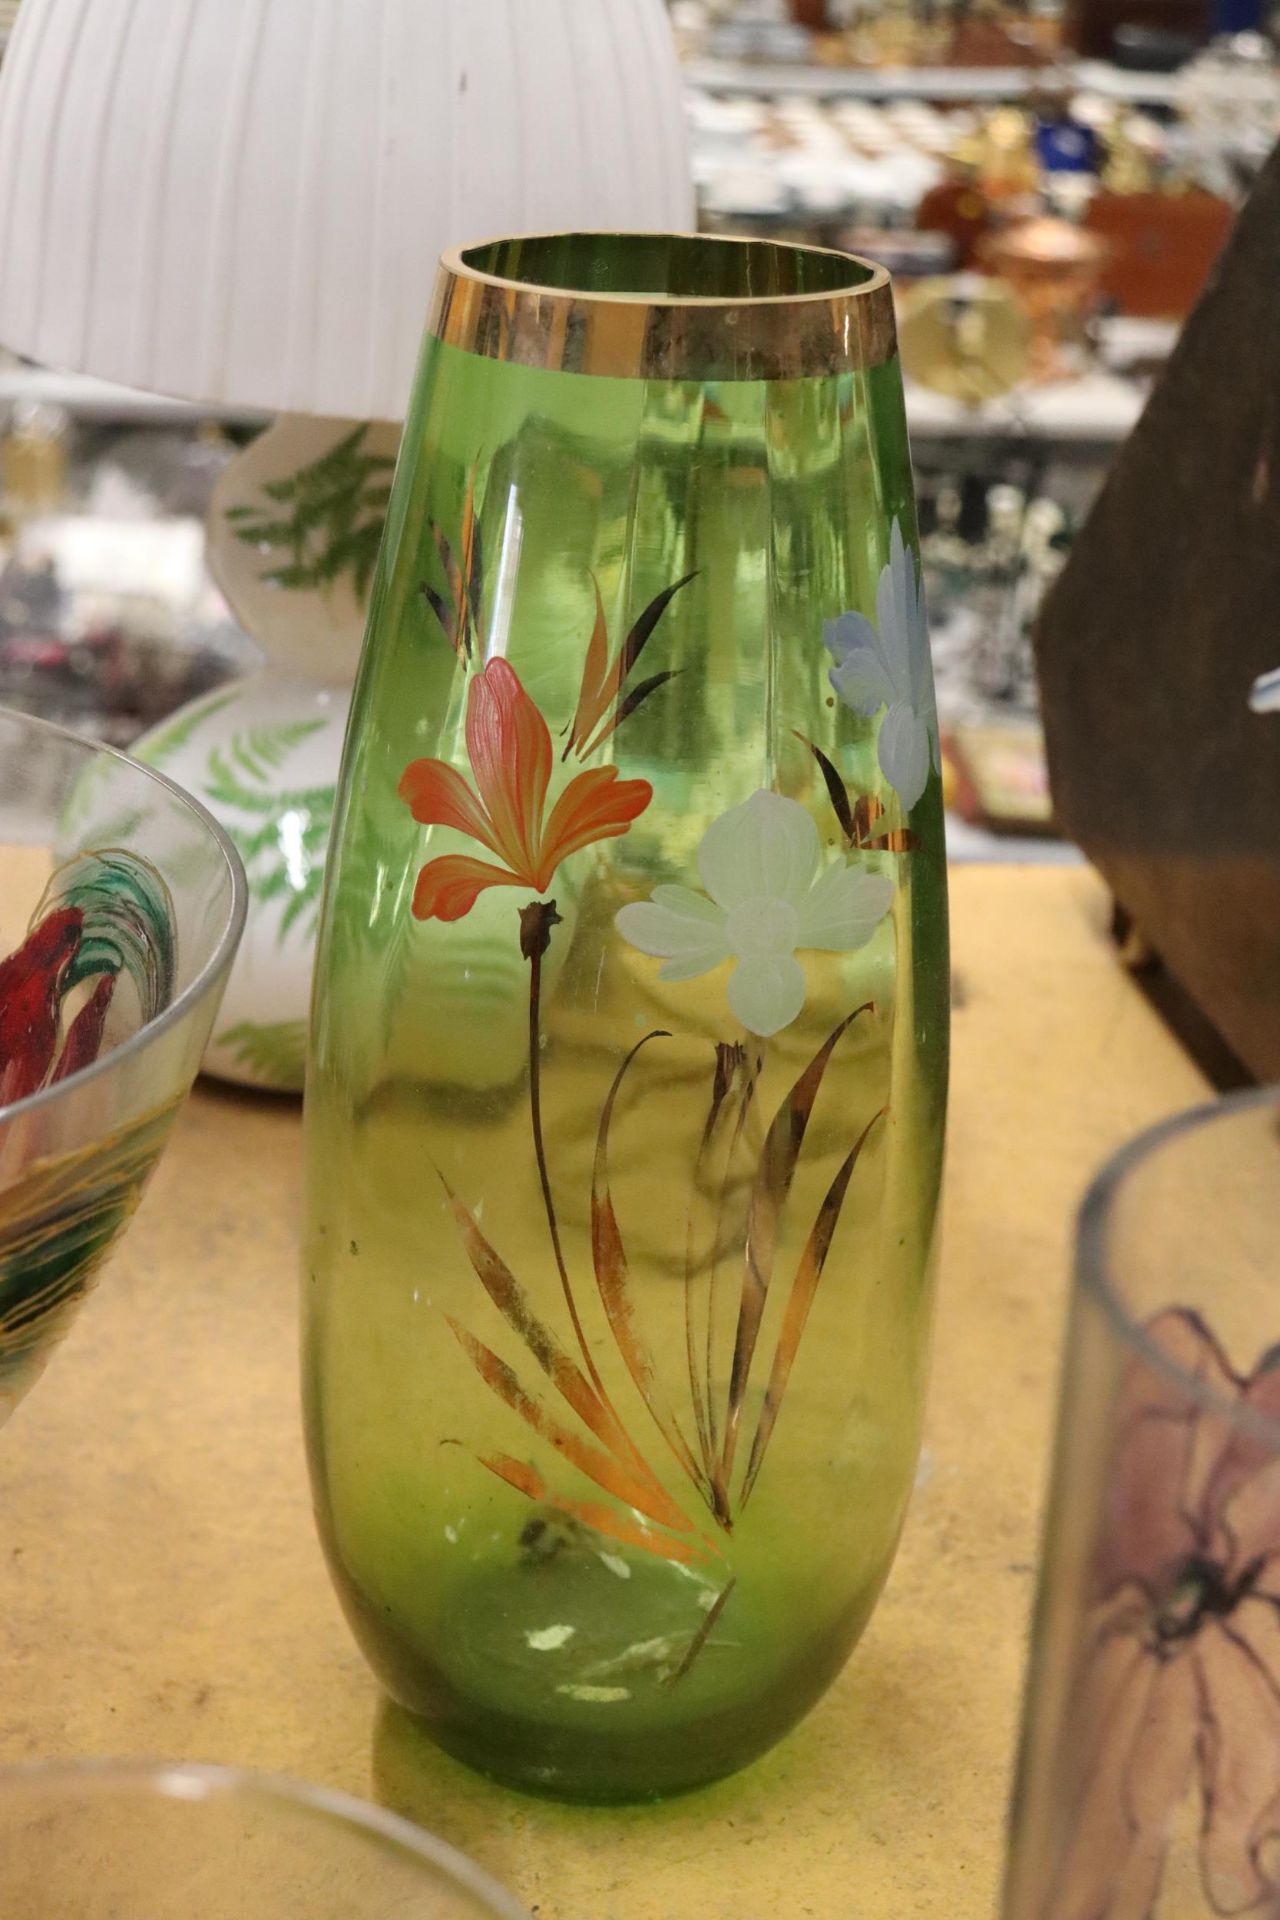 A LARGE MIXED LOT OF PAINTED ON GLASS VASES PLUS ONE DELCROFT WARE CERAMIC VASE - Image 7 of 11